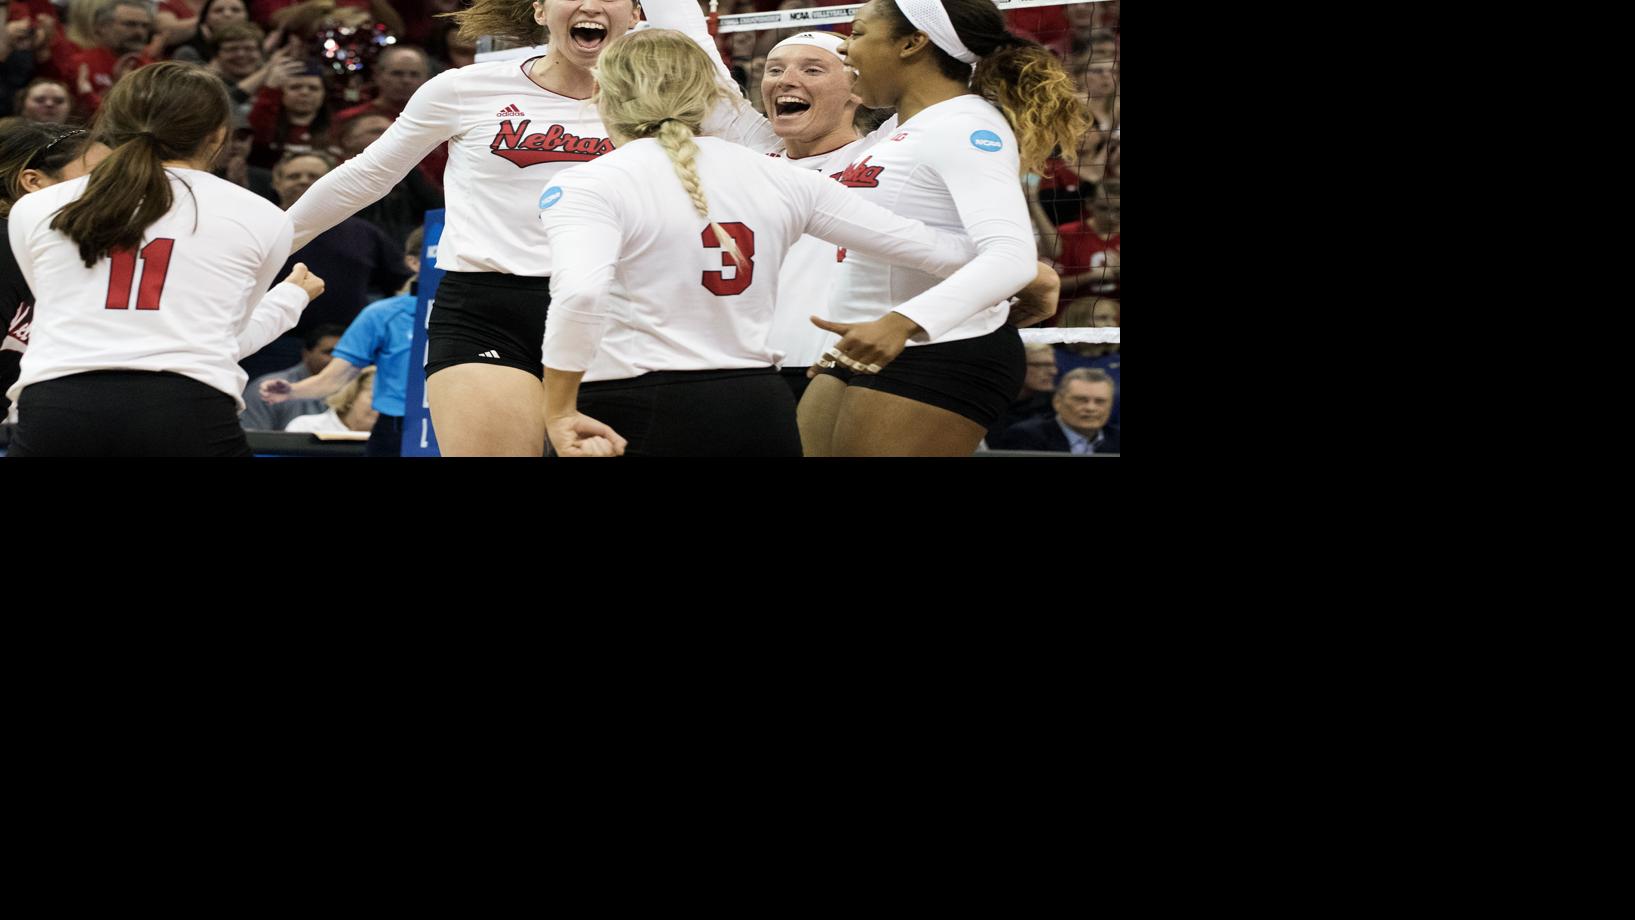 Nebraska volleyball team played at a high level from the start in 2016